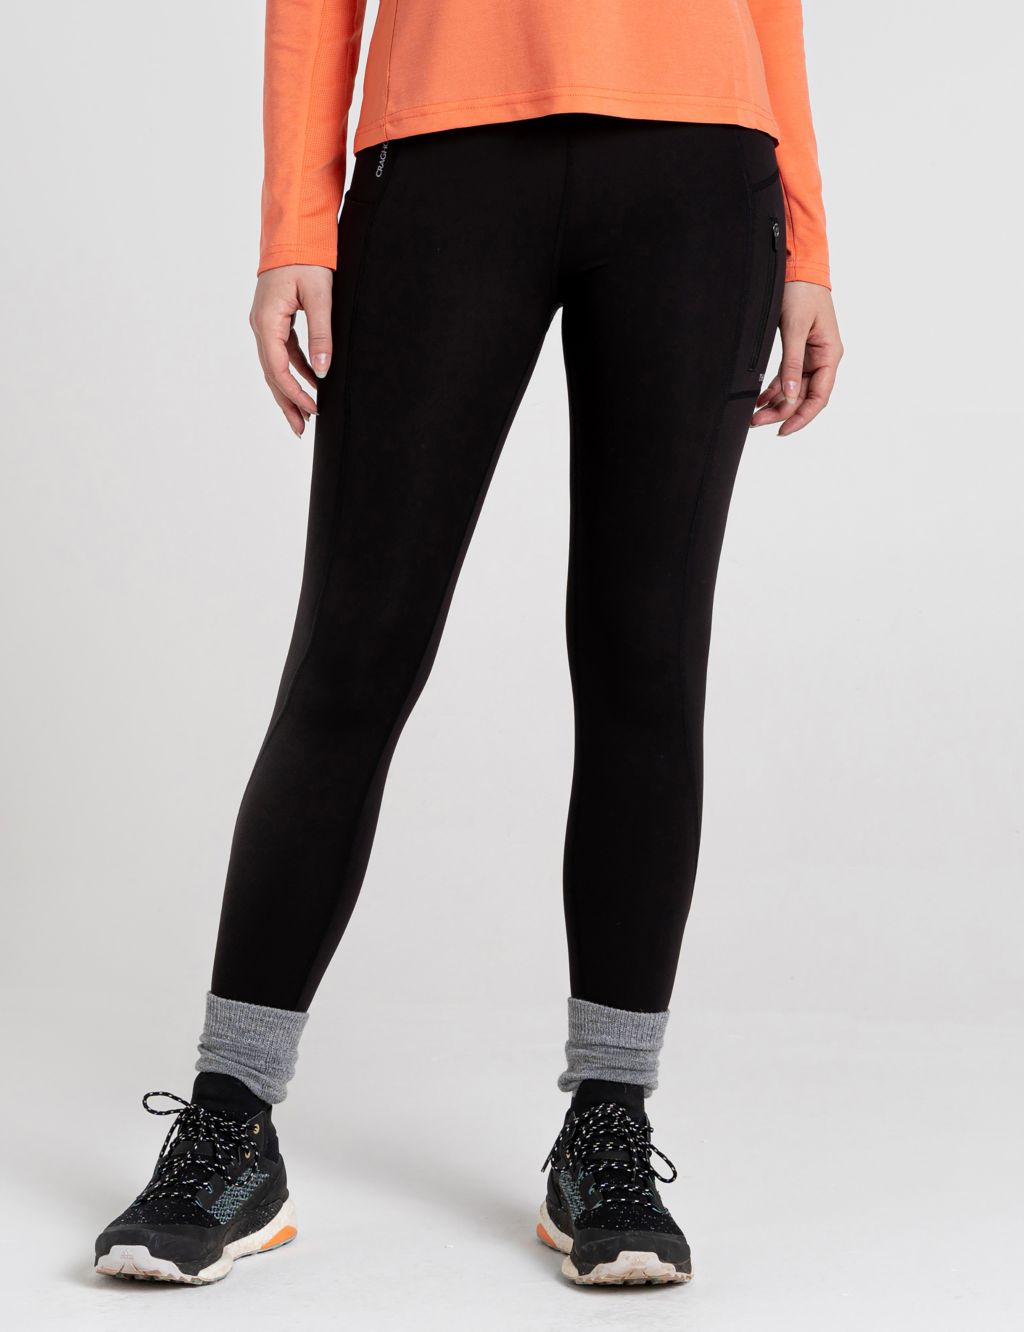 Craghoppers Women's Kiwi Pro Thermo Leggings - Frosted Pine